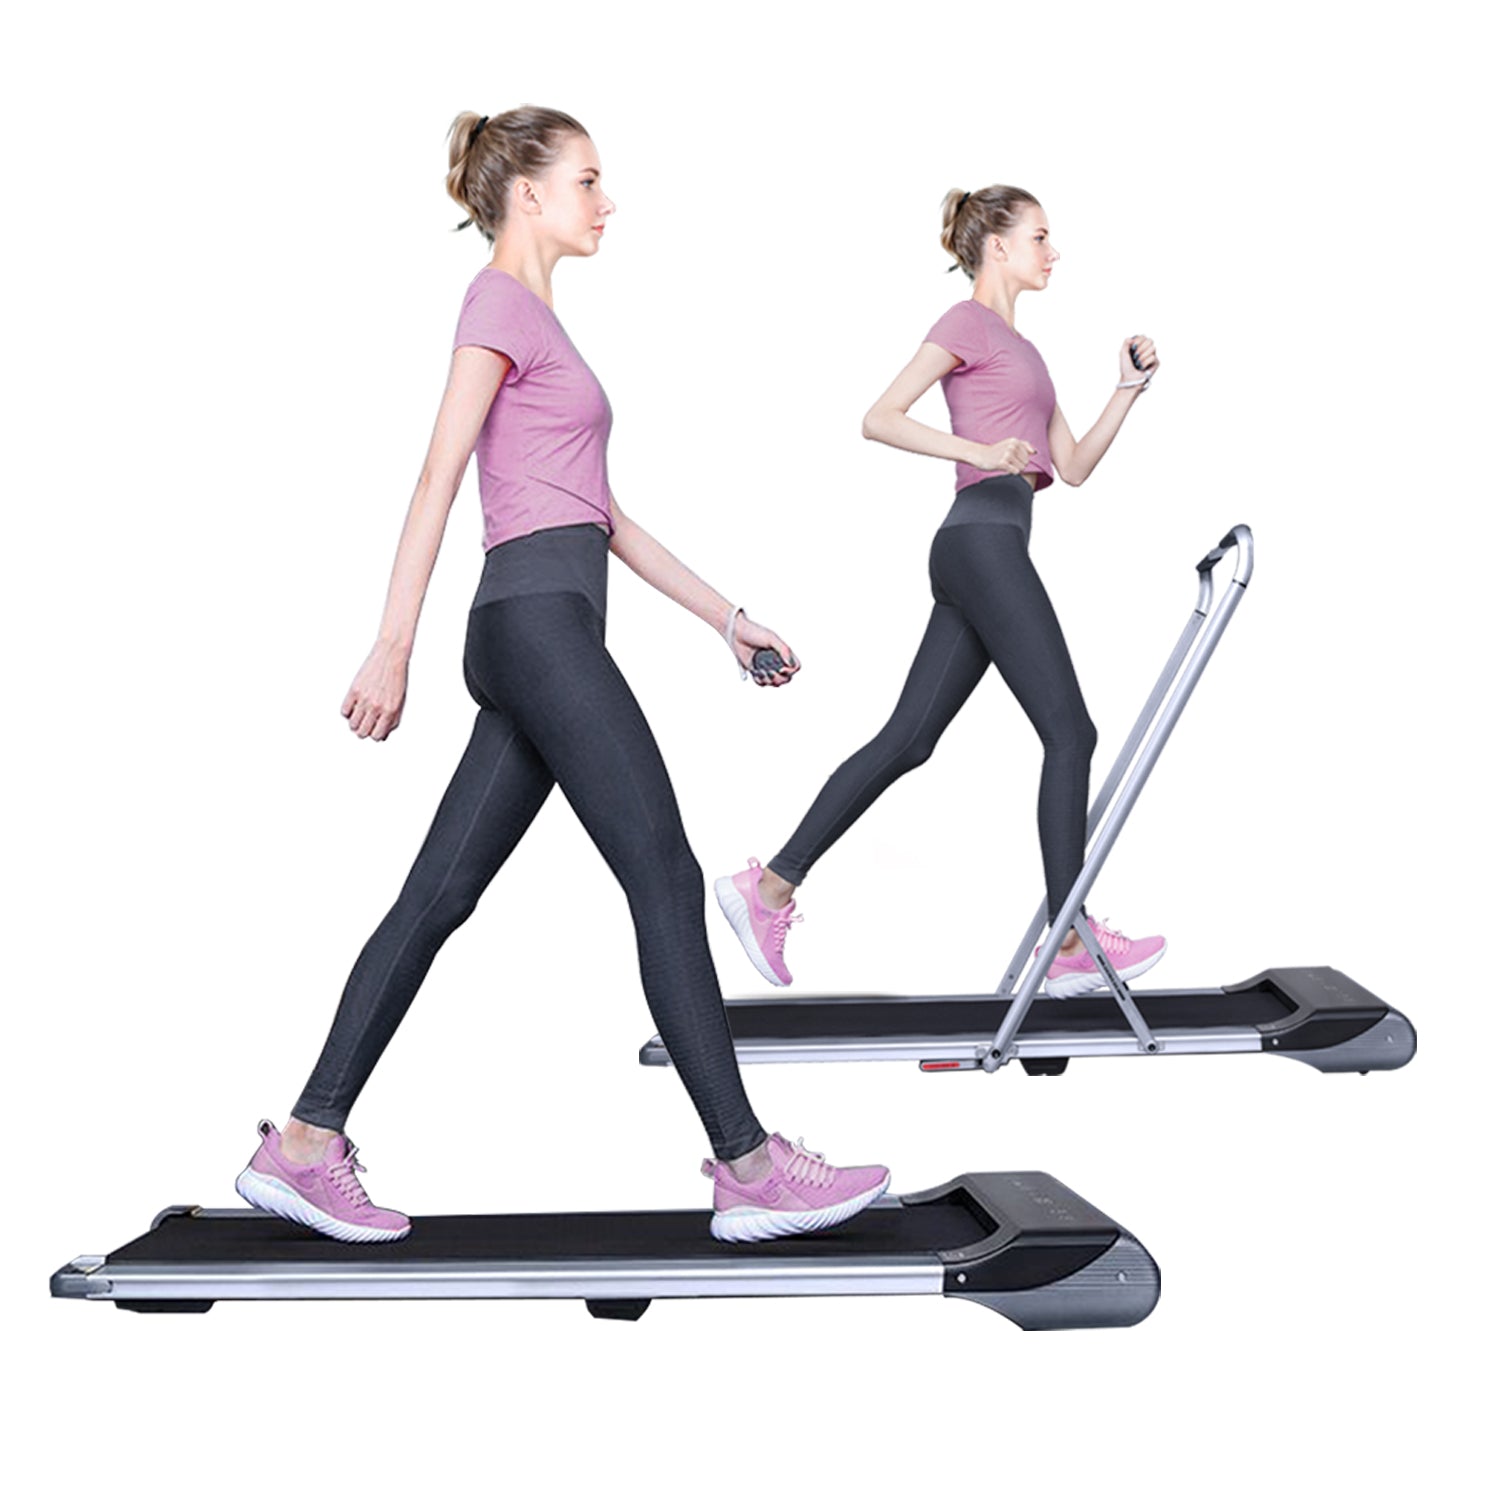 2-in-1 Portable Treadmill Light Slim Folding for Home Office (Air), Postpartum Use is also Very Safe-Trainnox